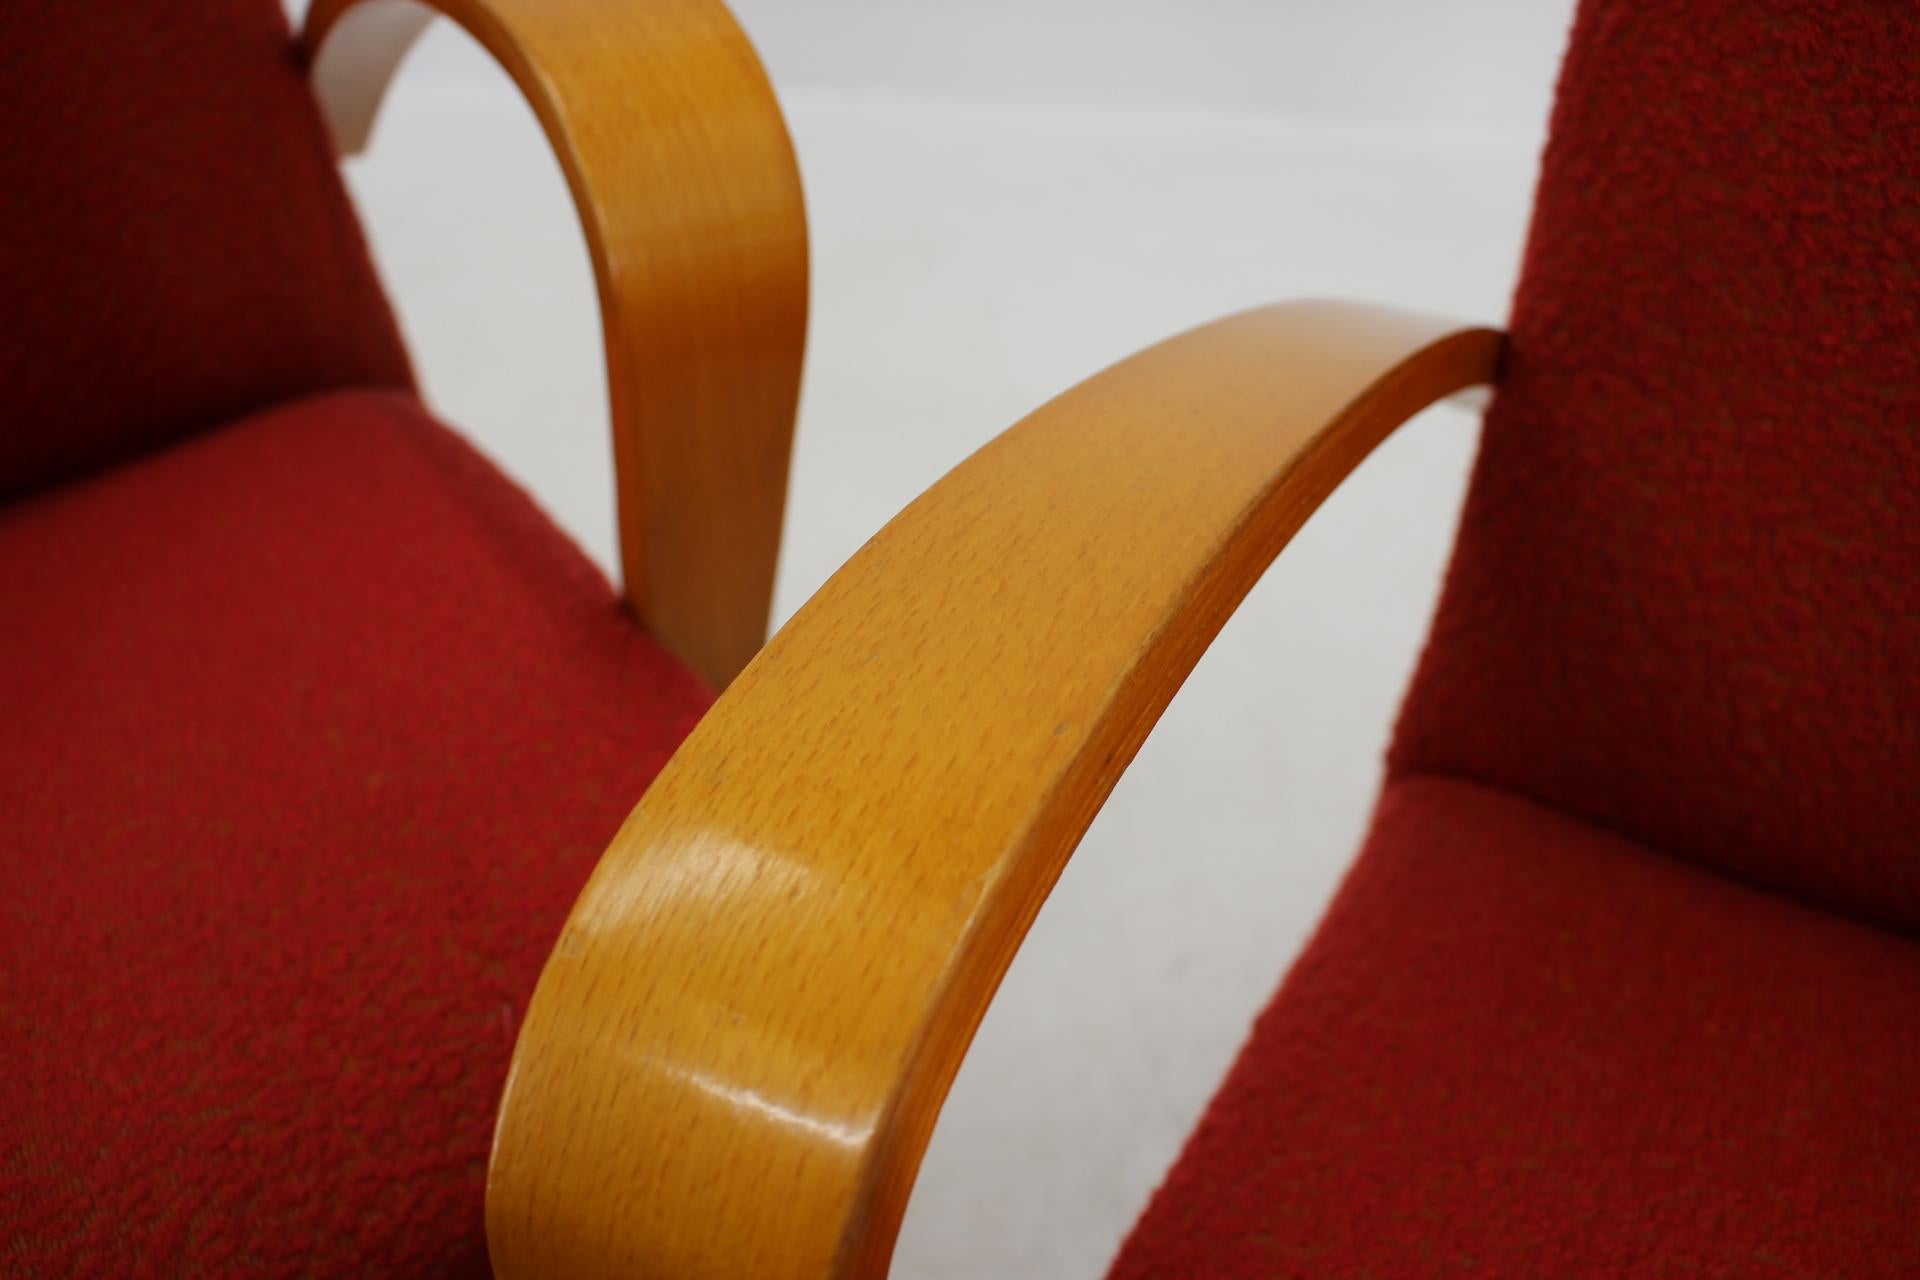 1960s Frantisek Jirak Bentwood Lounge Chairs, Set of 2 For Sale 1